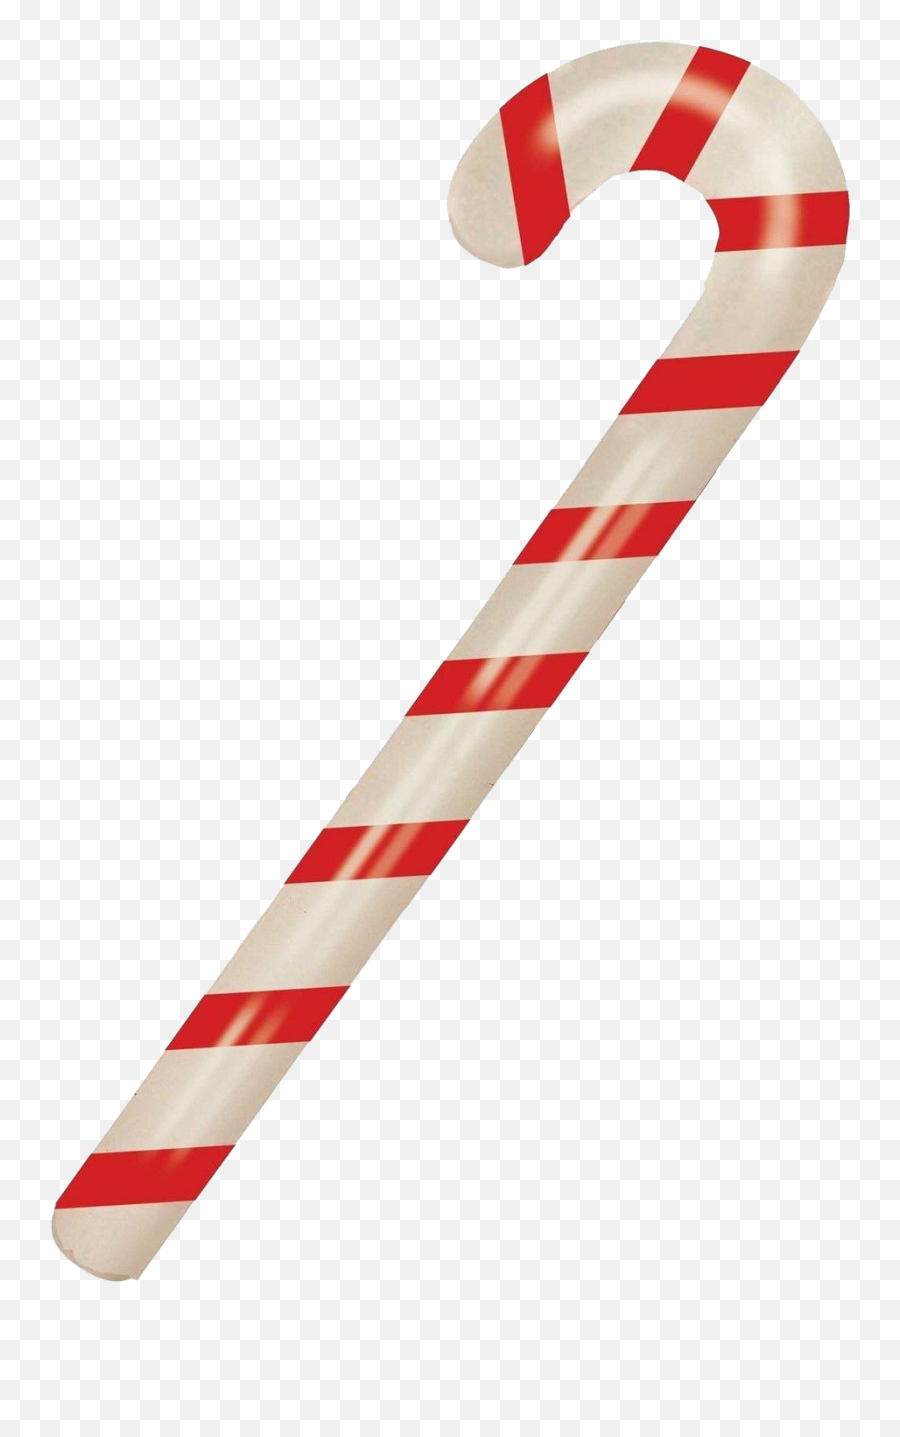 Peppermint Candy Cane Png Image Background Arts - Candy Stick,Candycane Png